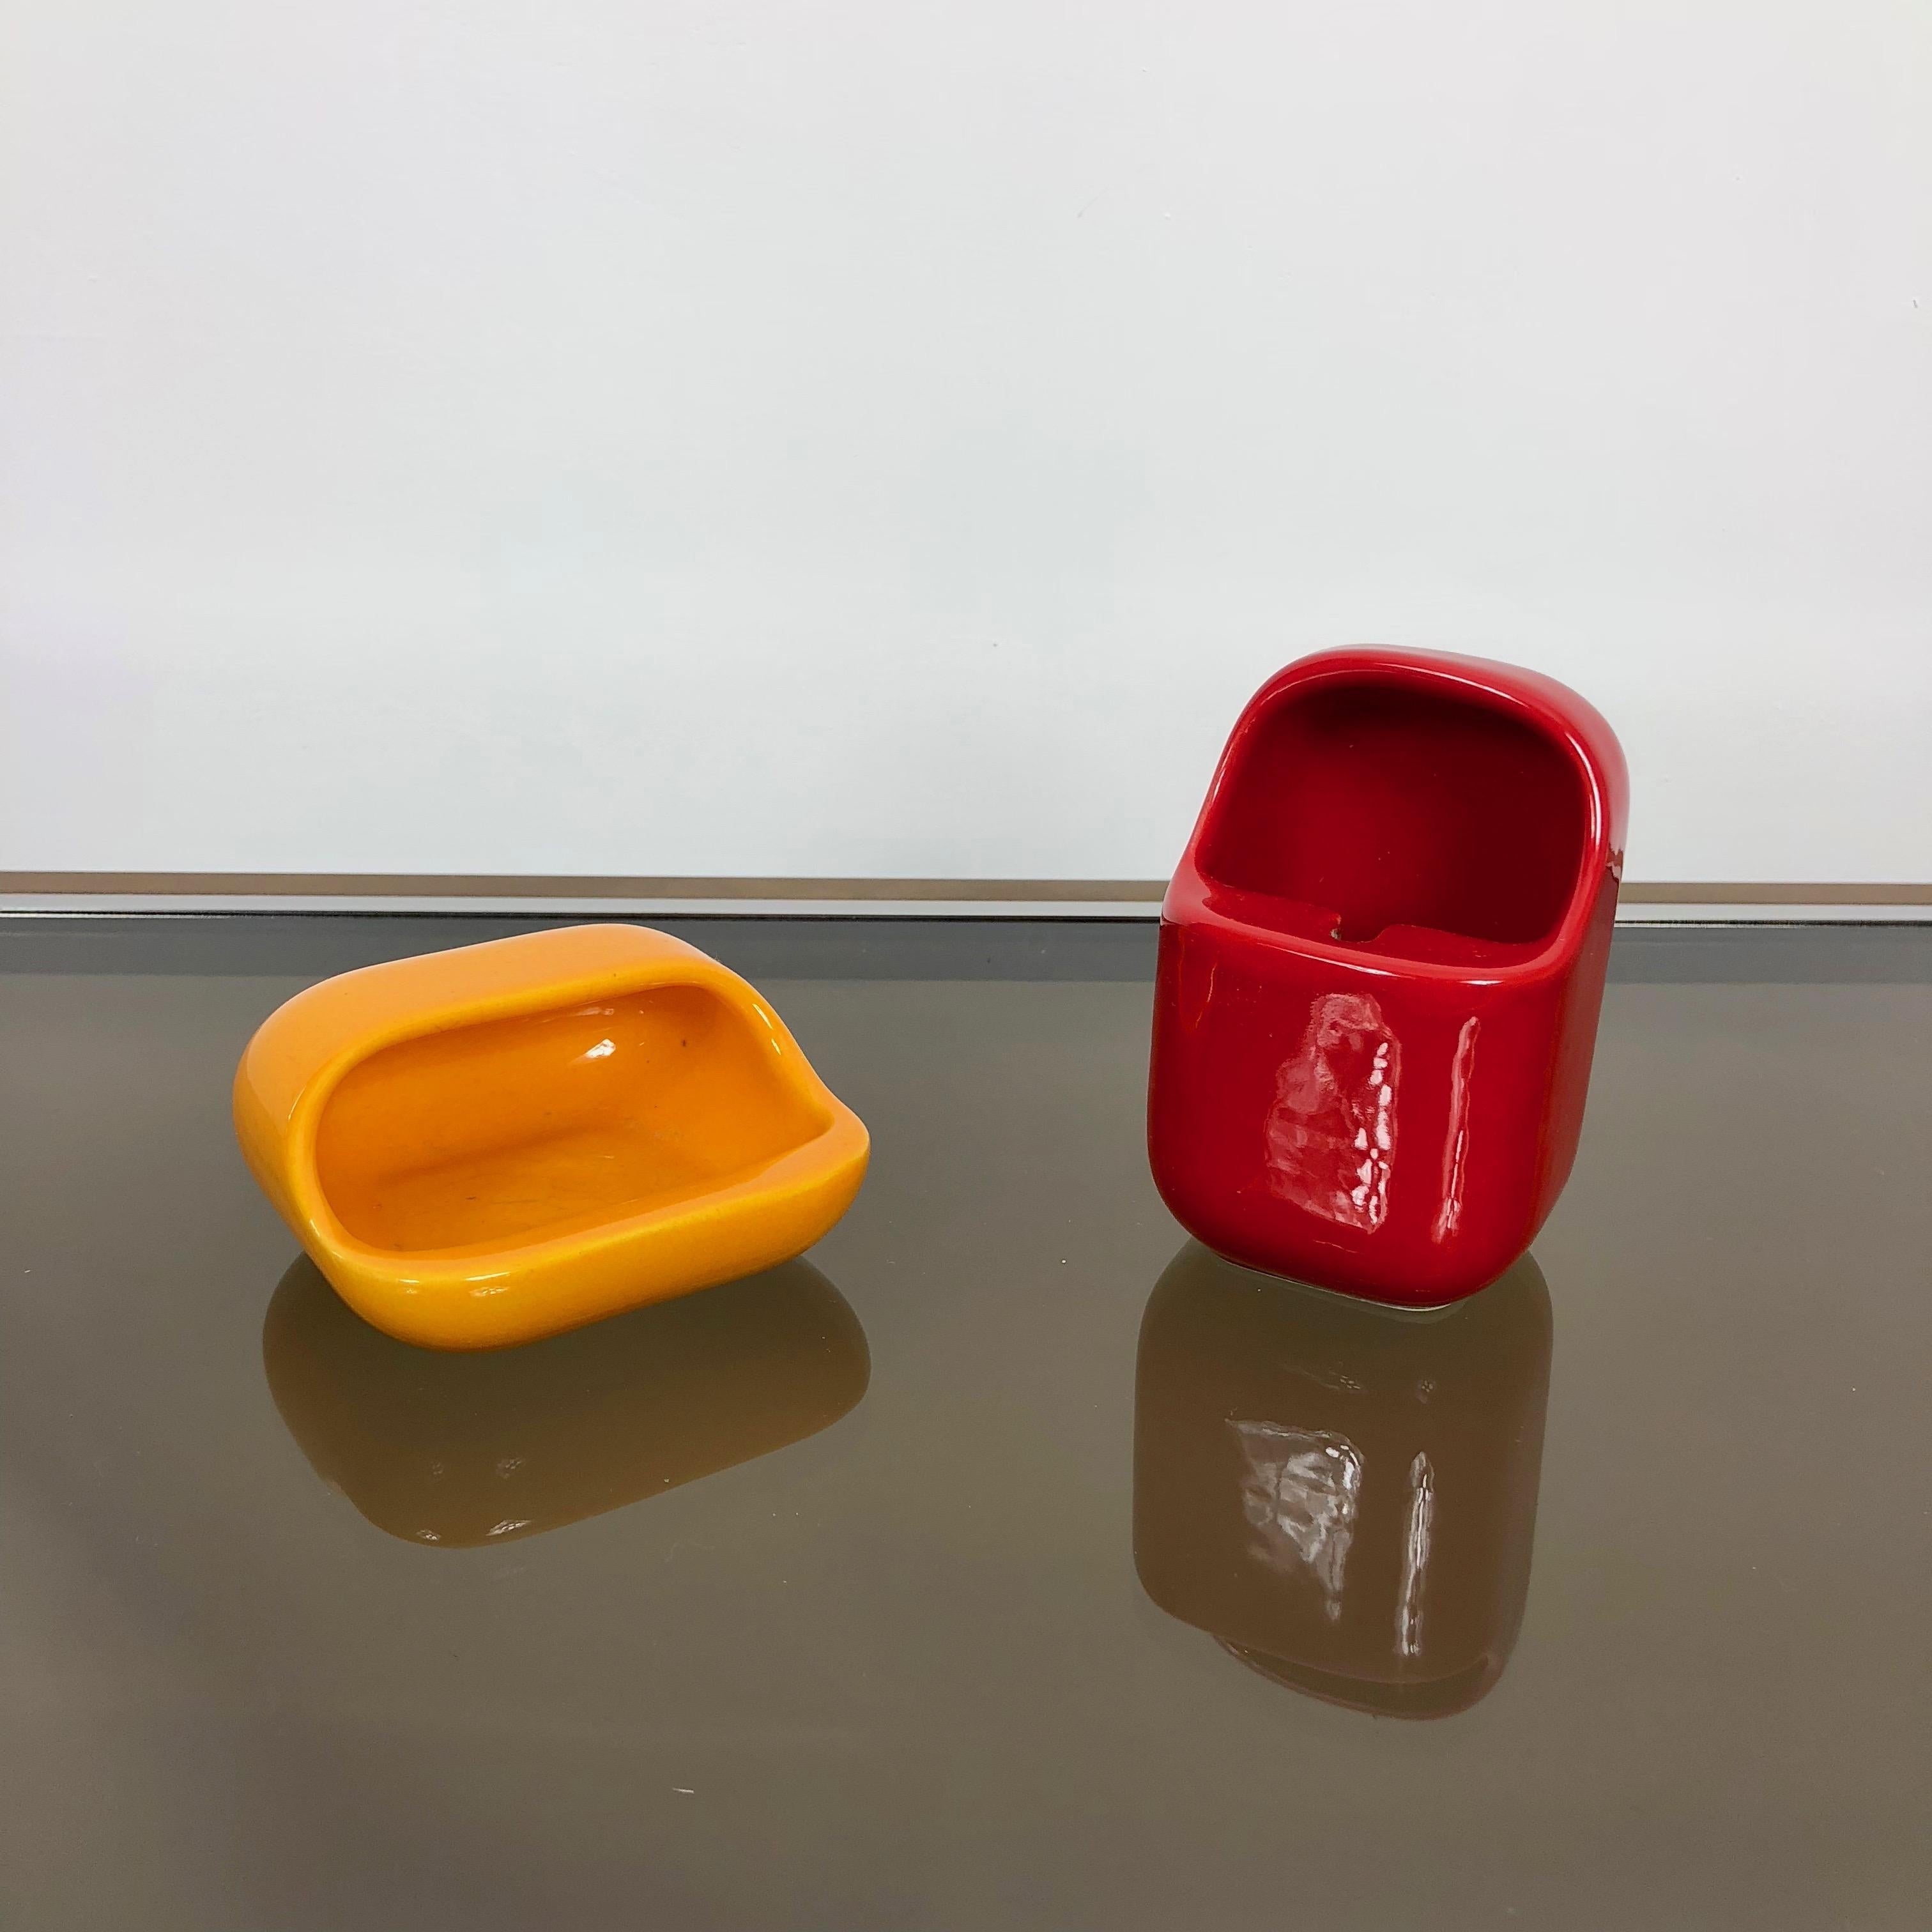 Pair of small ceramic red and orange ashtray by Gabbianelli, Italy, 1970s.

Dimensions: 8 x 8 x 3.5 - red 6 x 6 x 9 cm.
 